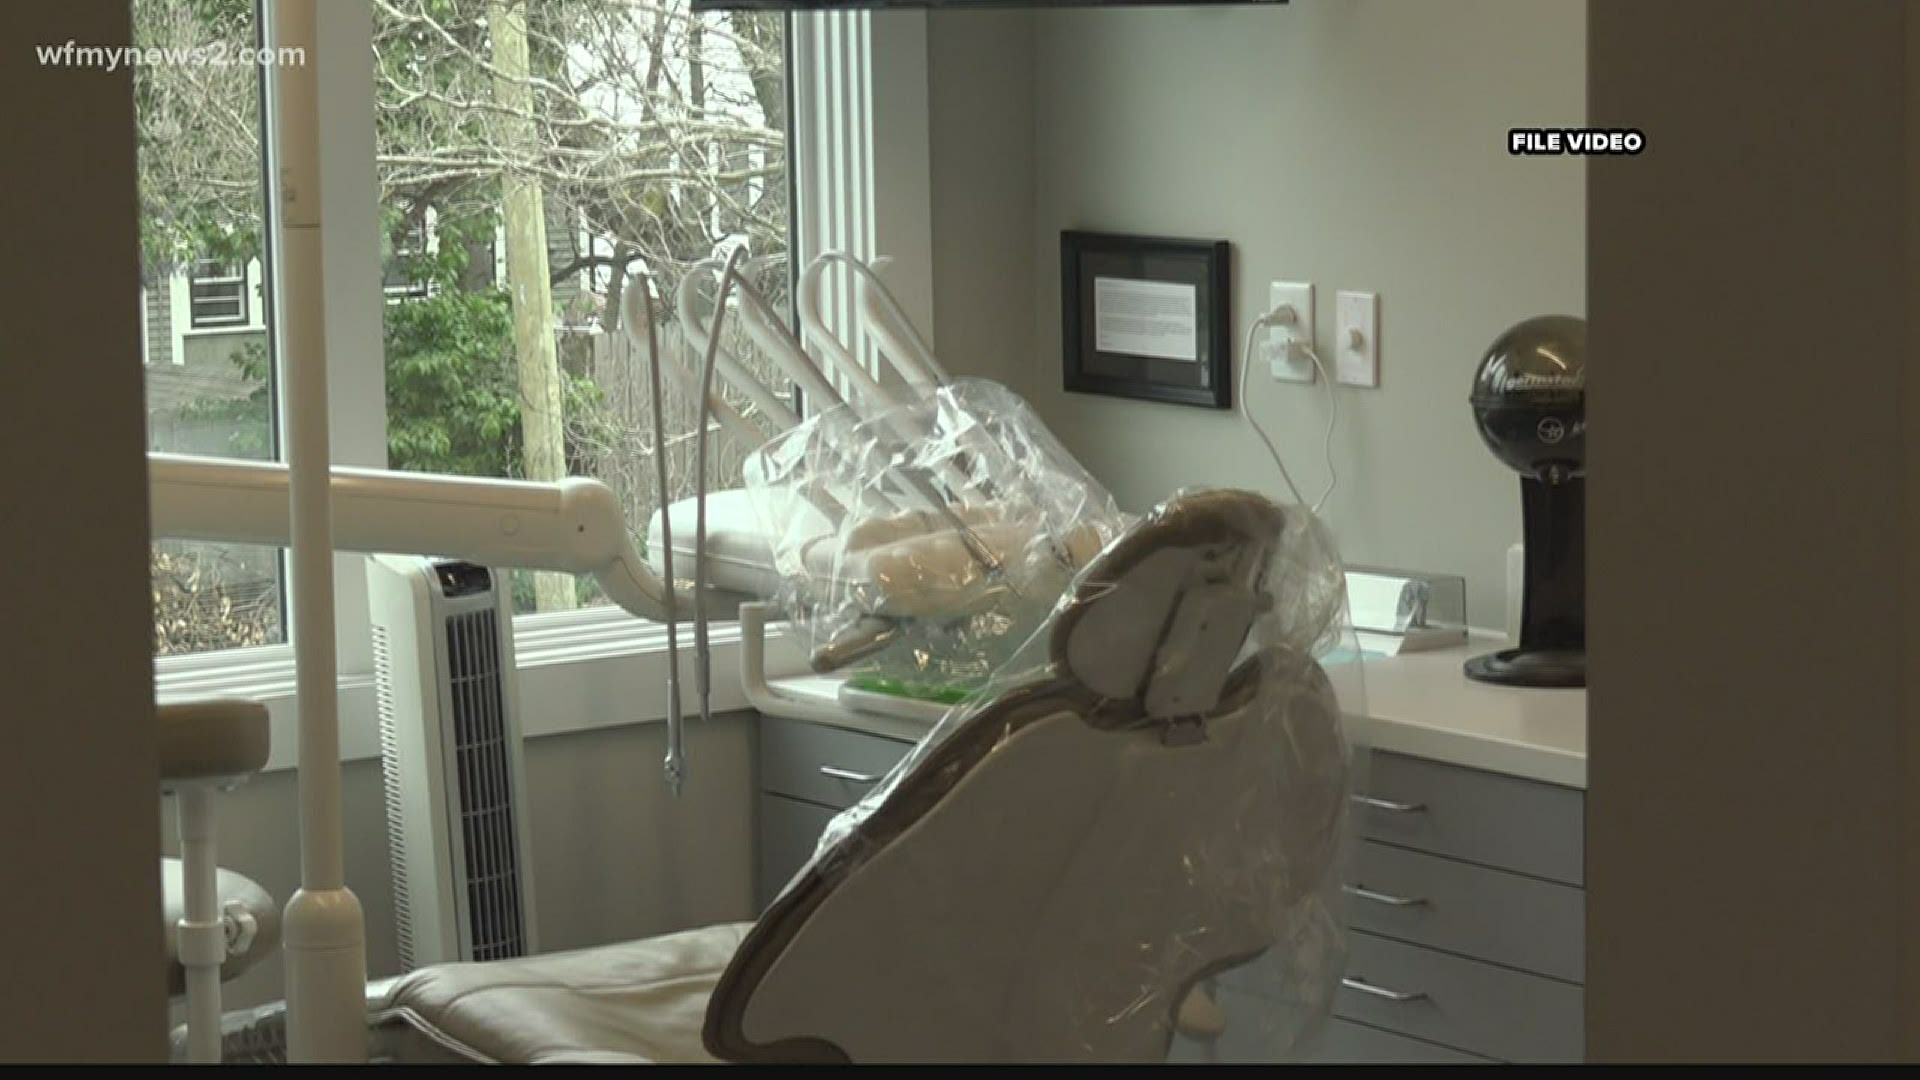 The North Carolina Dental Society says you should feel safe going to a regular dental appointment despite the COVID-19 crisis.